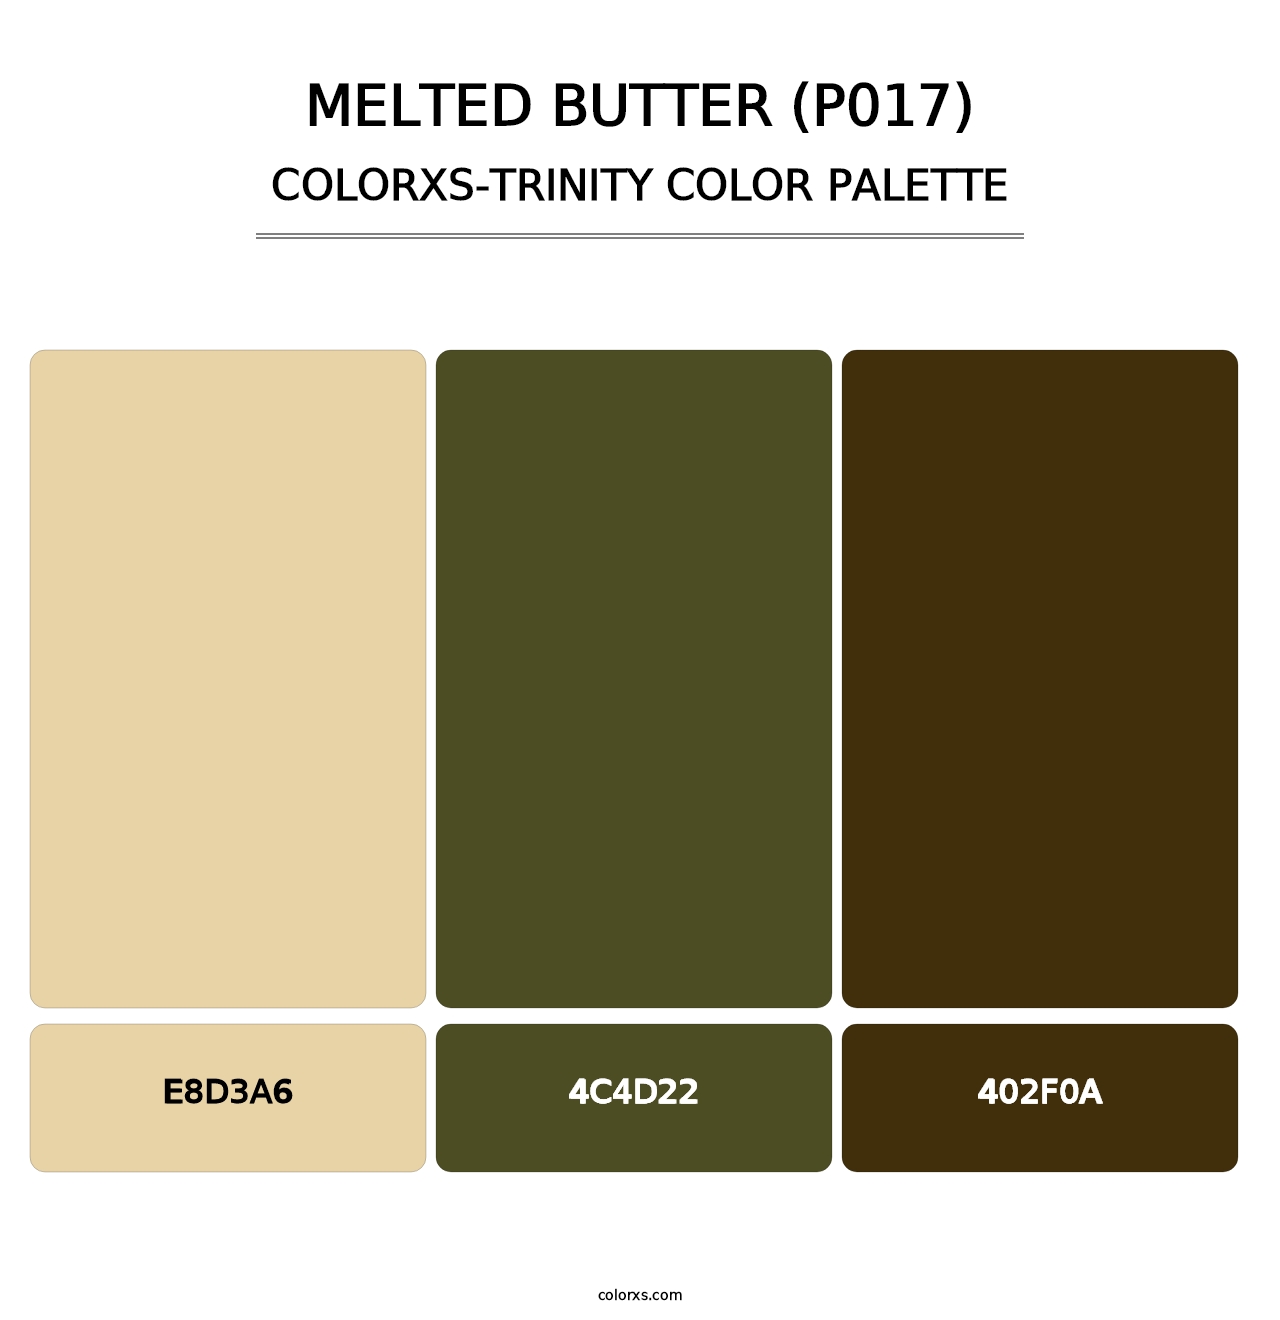 Melted Butter (P017) - Colorxs Trinity Palette